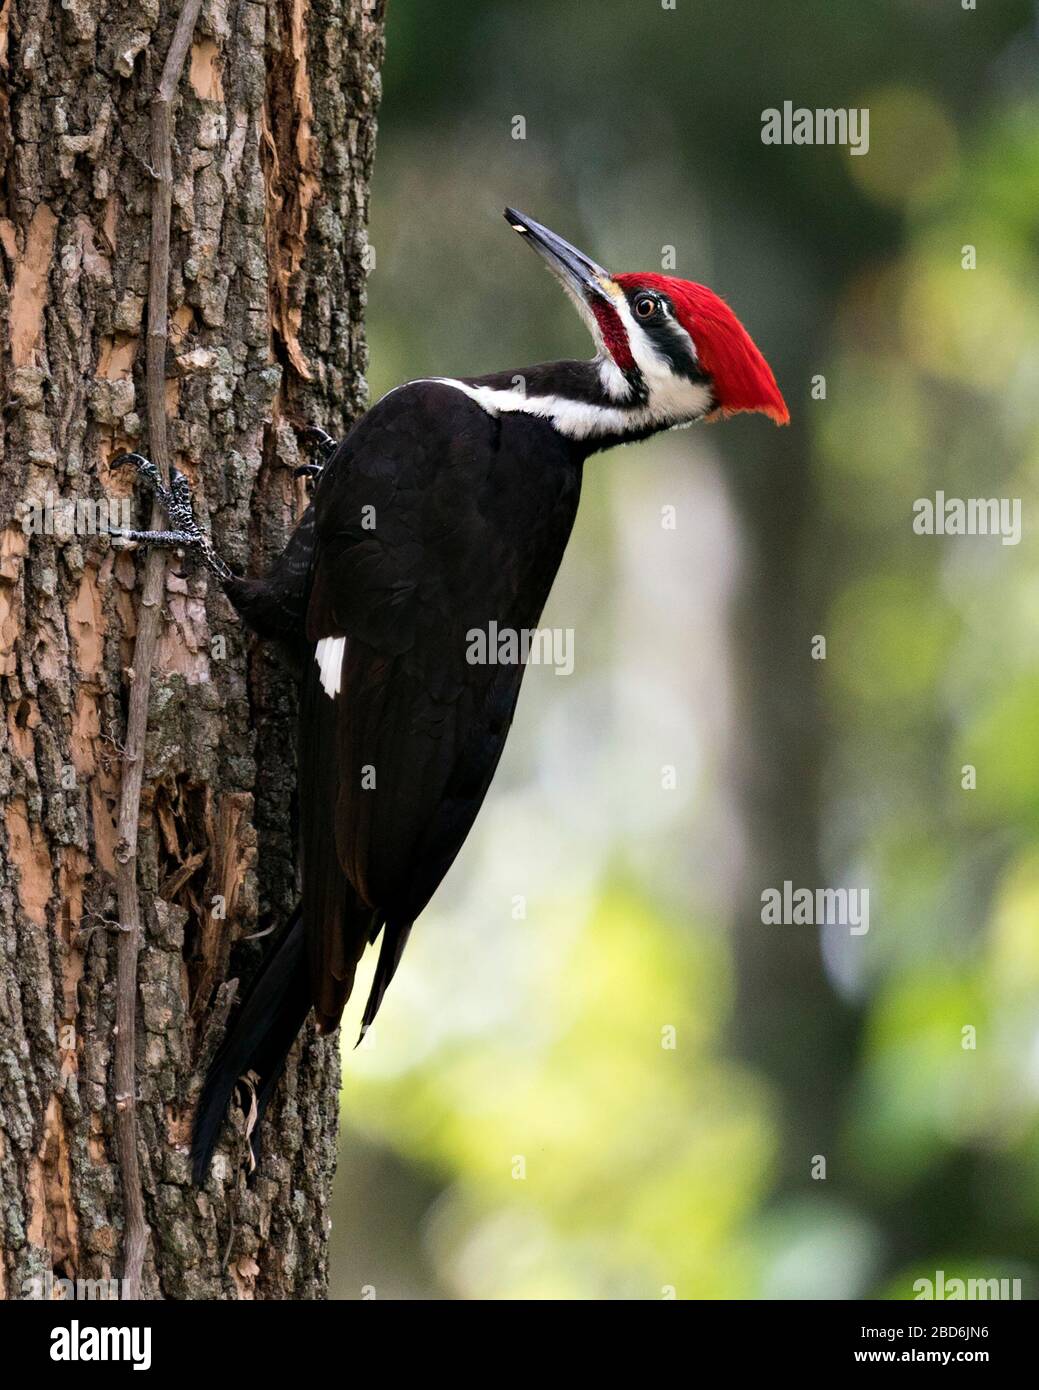 Woodpecker bird perched on a tree displaying body, plumage in its environment and surrounding in the forest with a blur background. Stock Photo